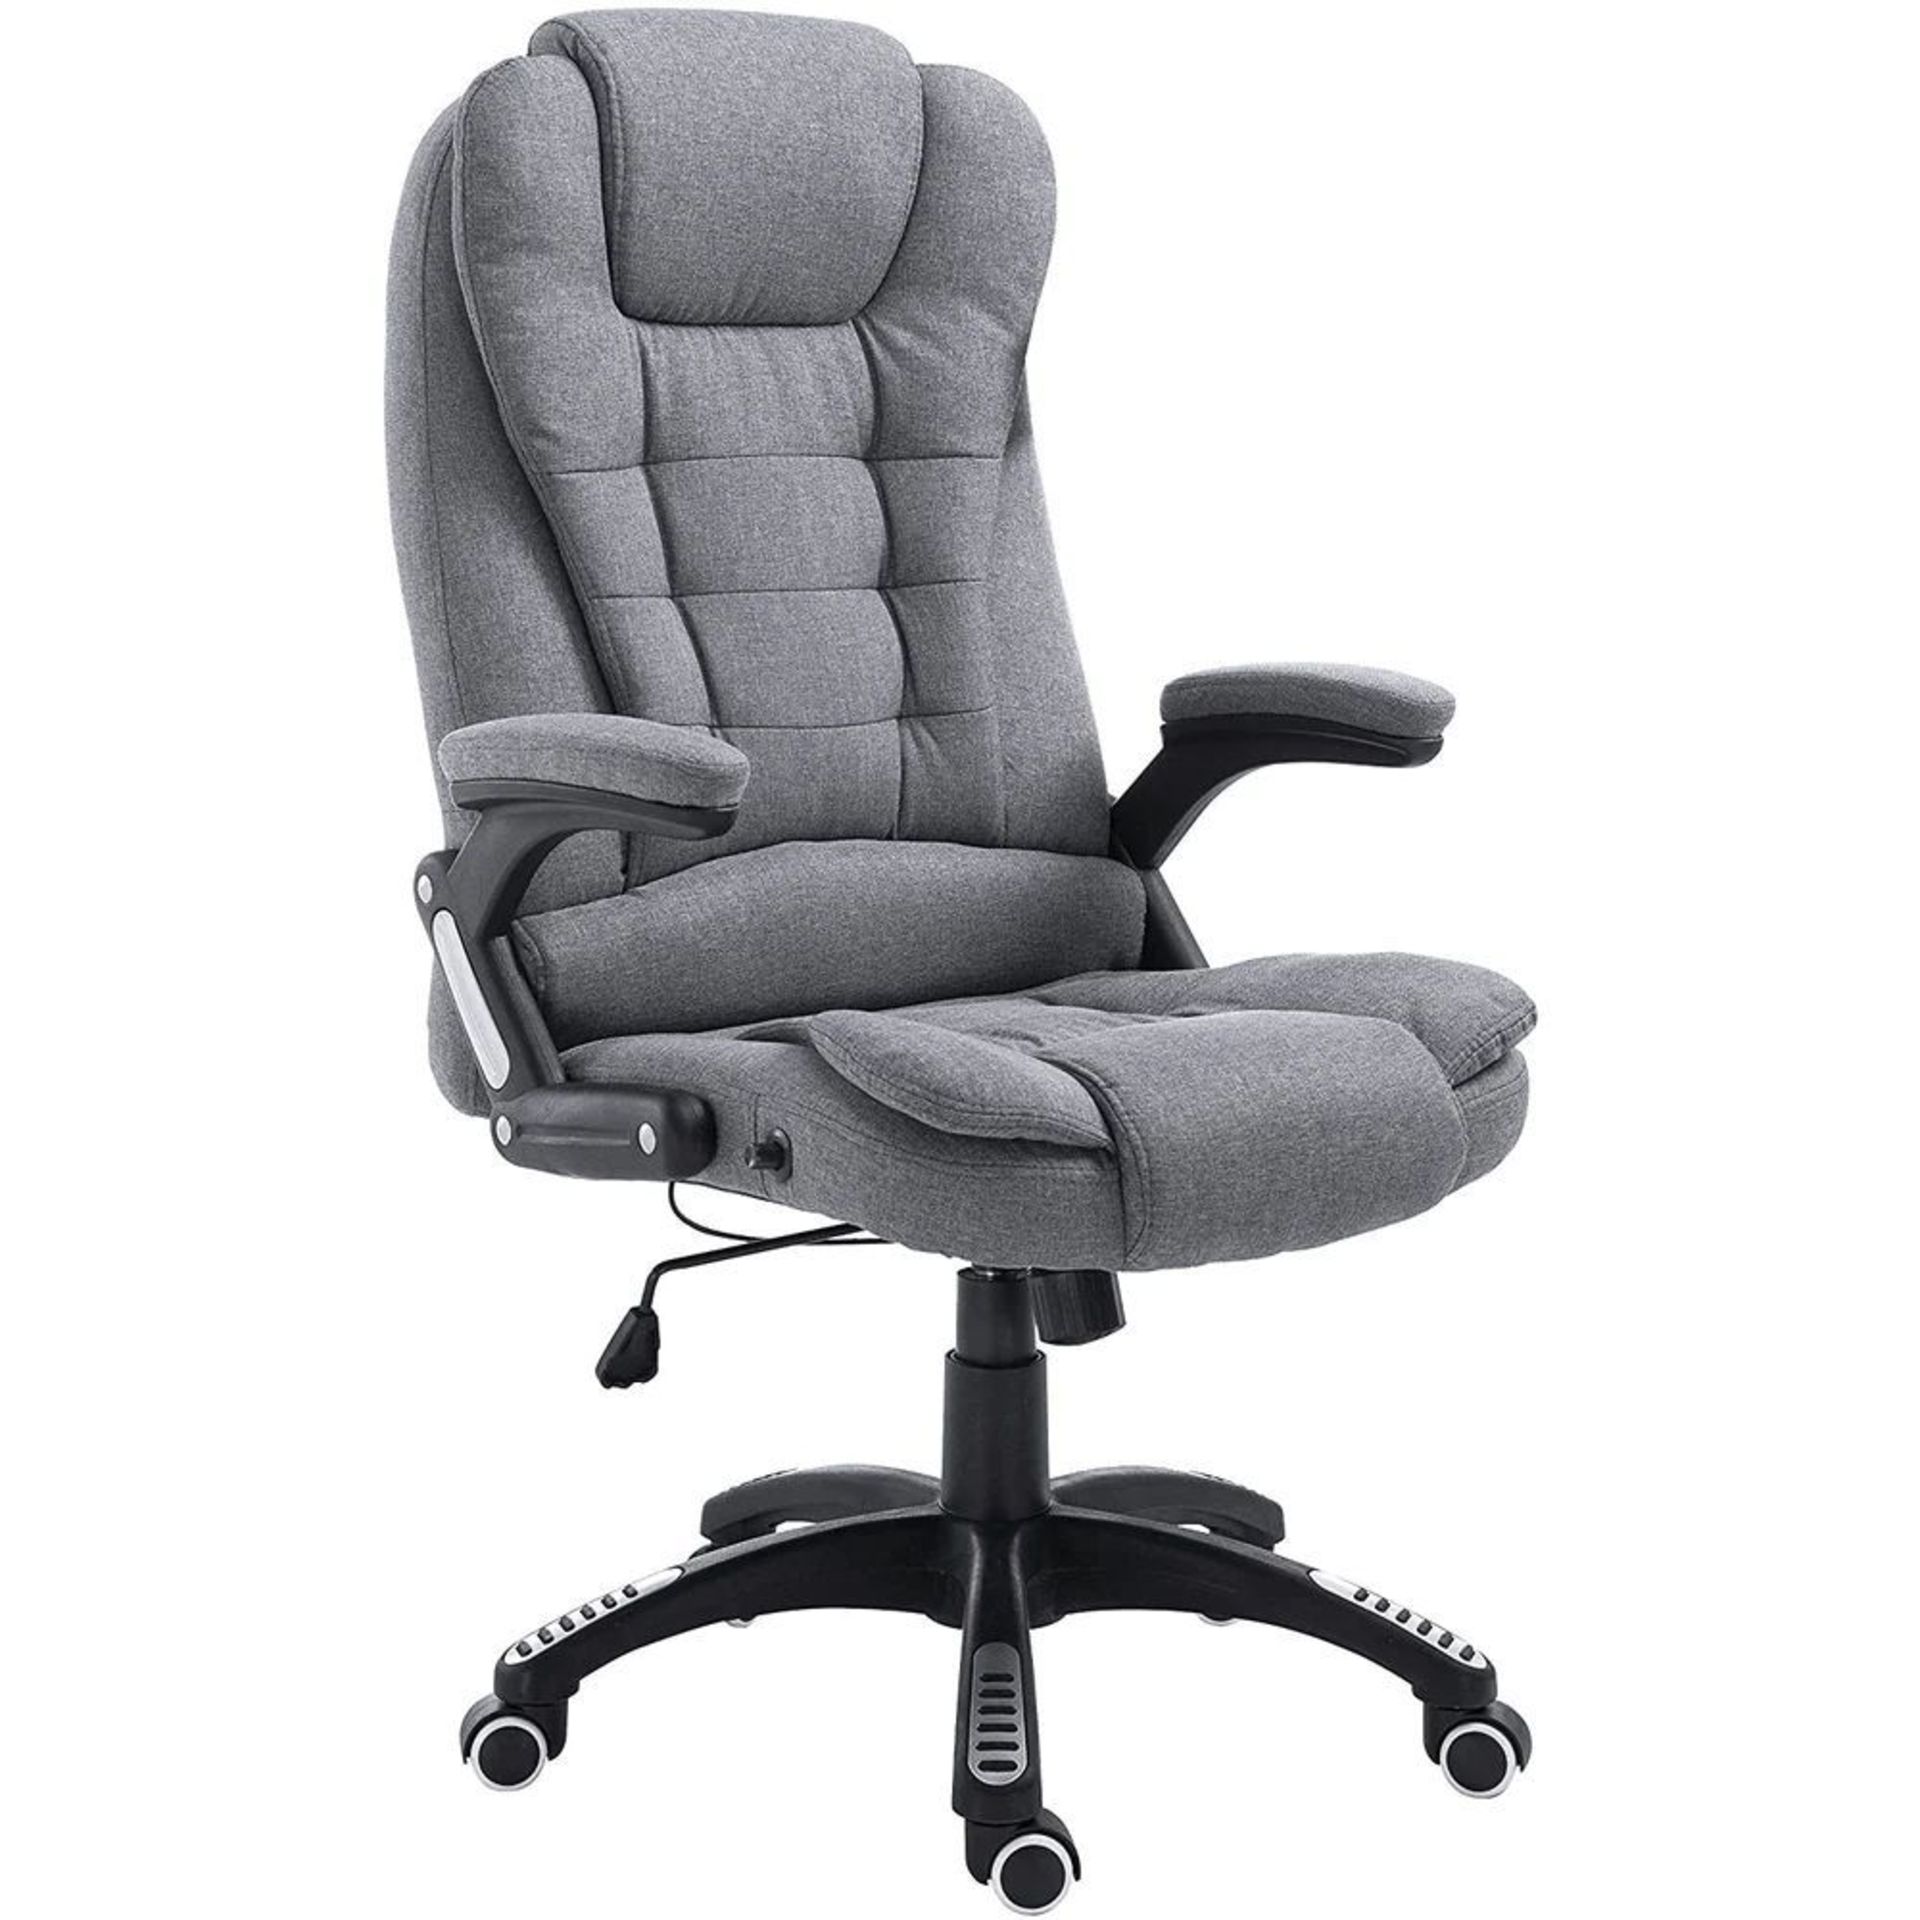 Cherry Tree Furniture Executive Recline Extra Padded Office Chair Standard, MO17 Grey Fabric. - - Image 2 of 2